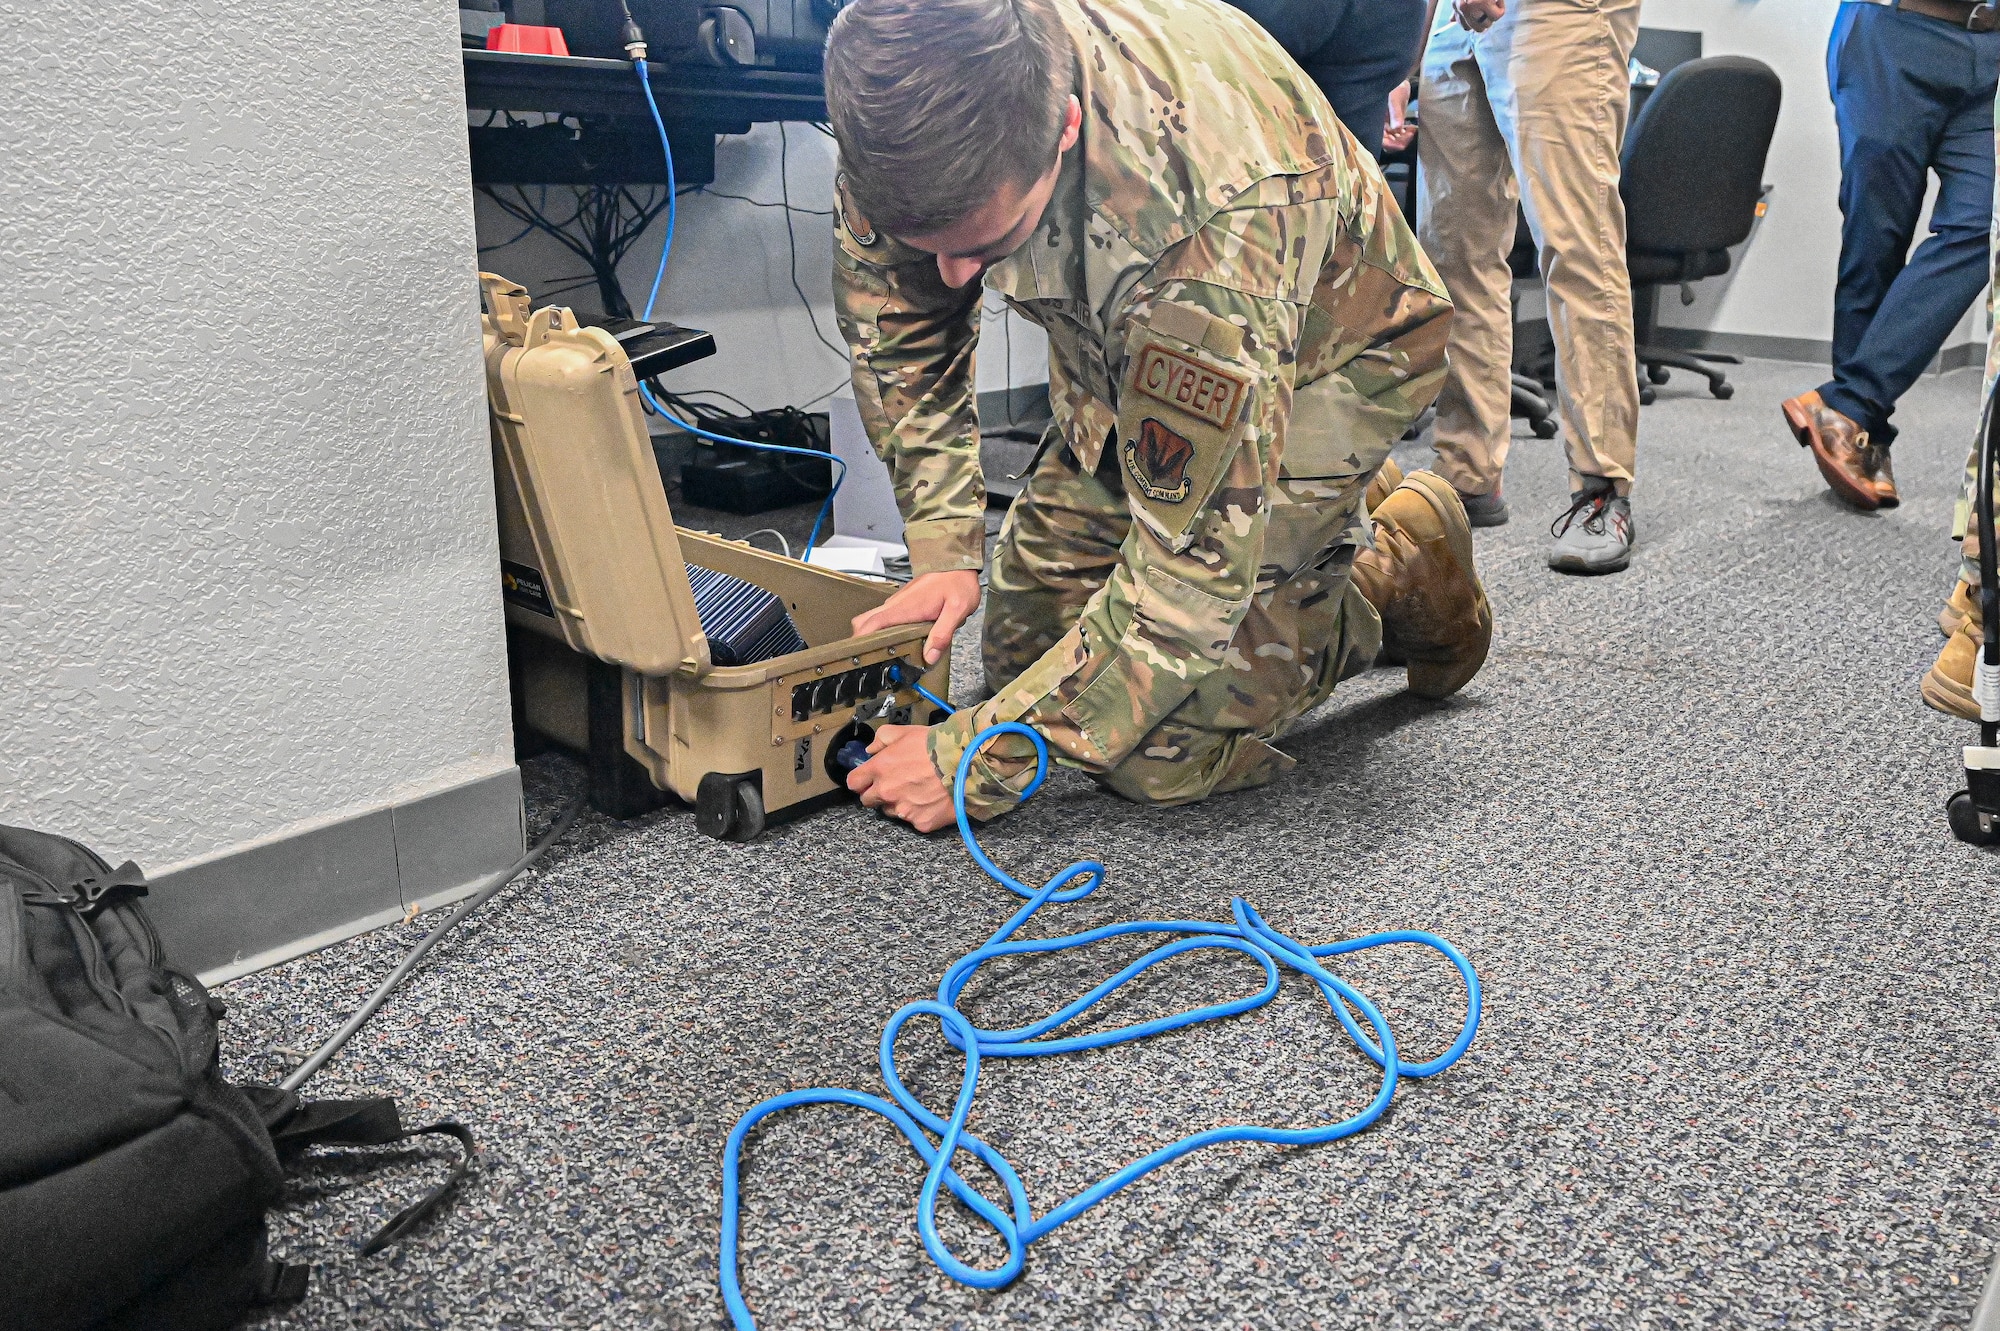 Pictured above is a man setting up wires.